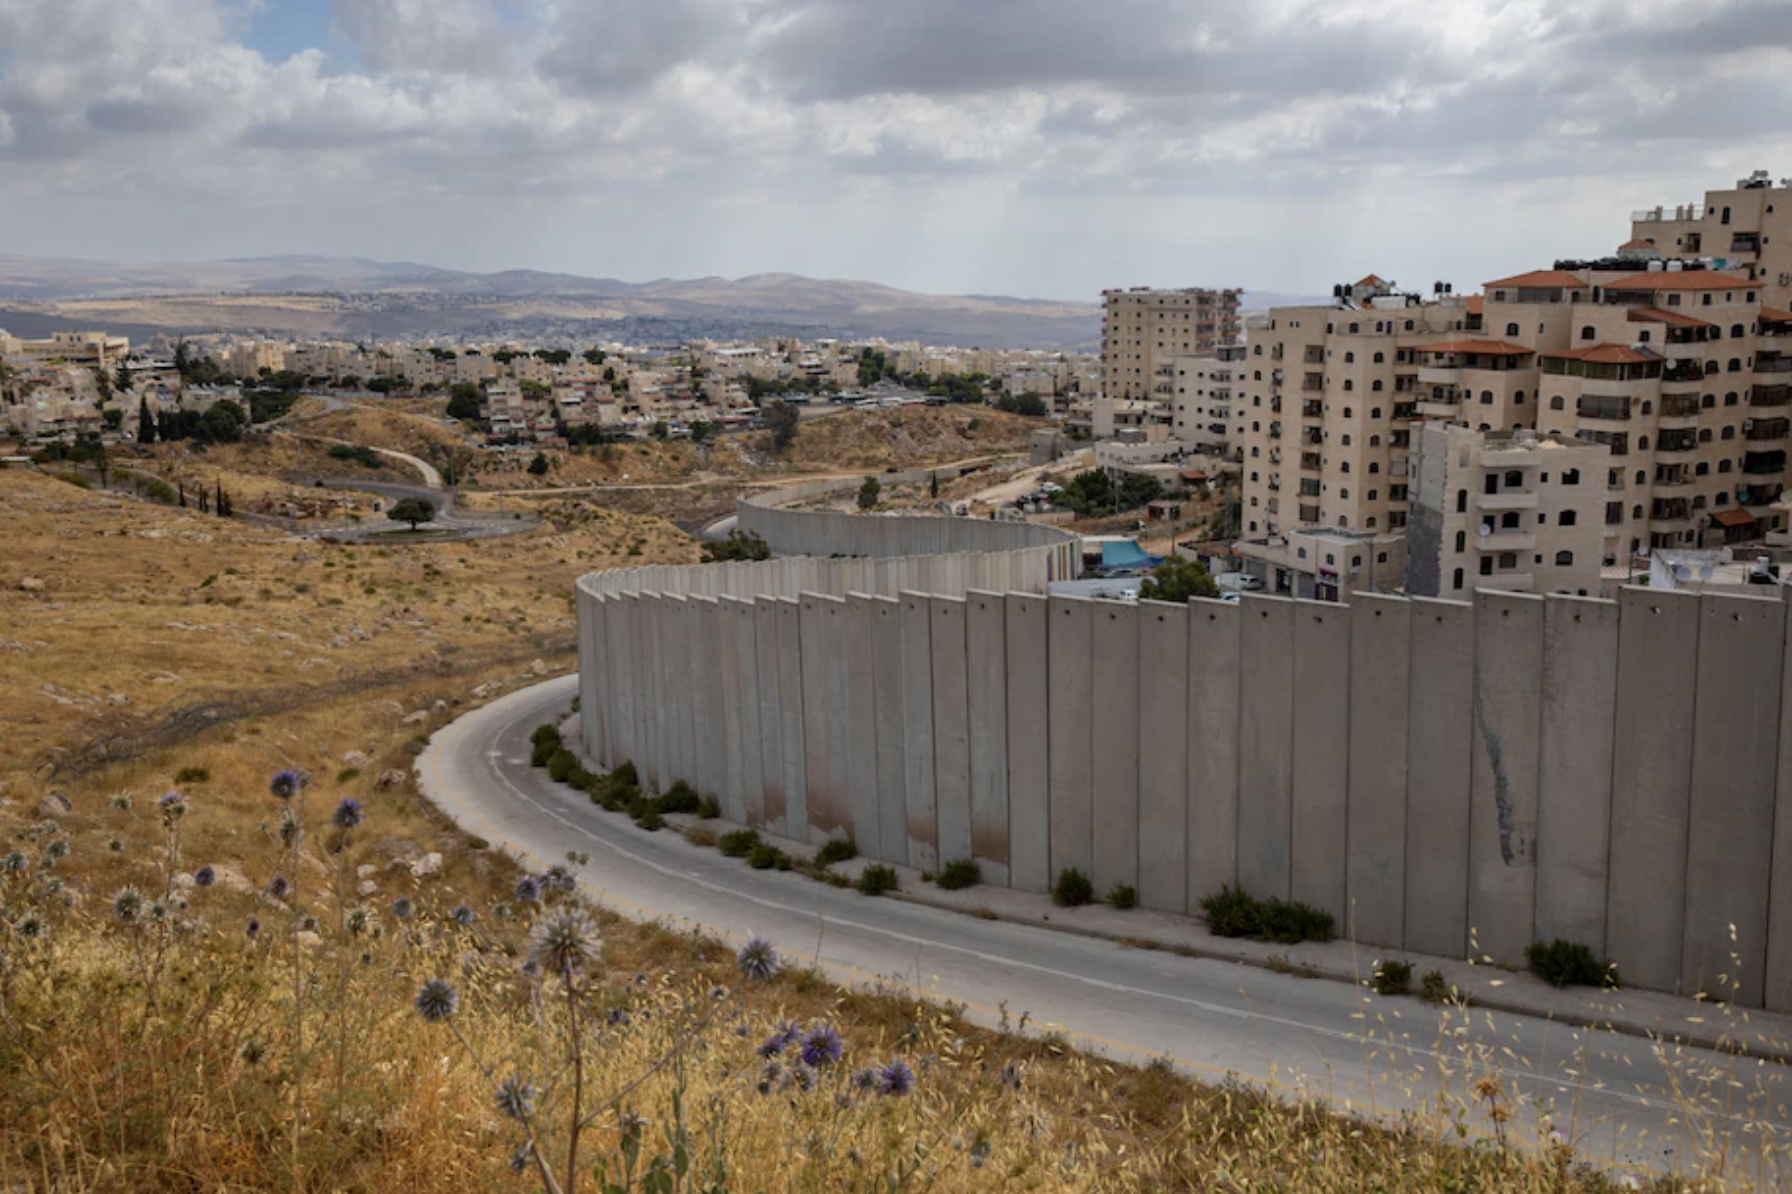 A view of the Shuafat refugee camp along a section of Israel's separation barrier in Jerusalem